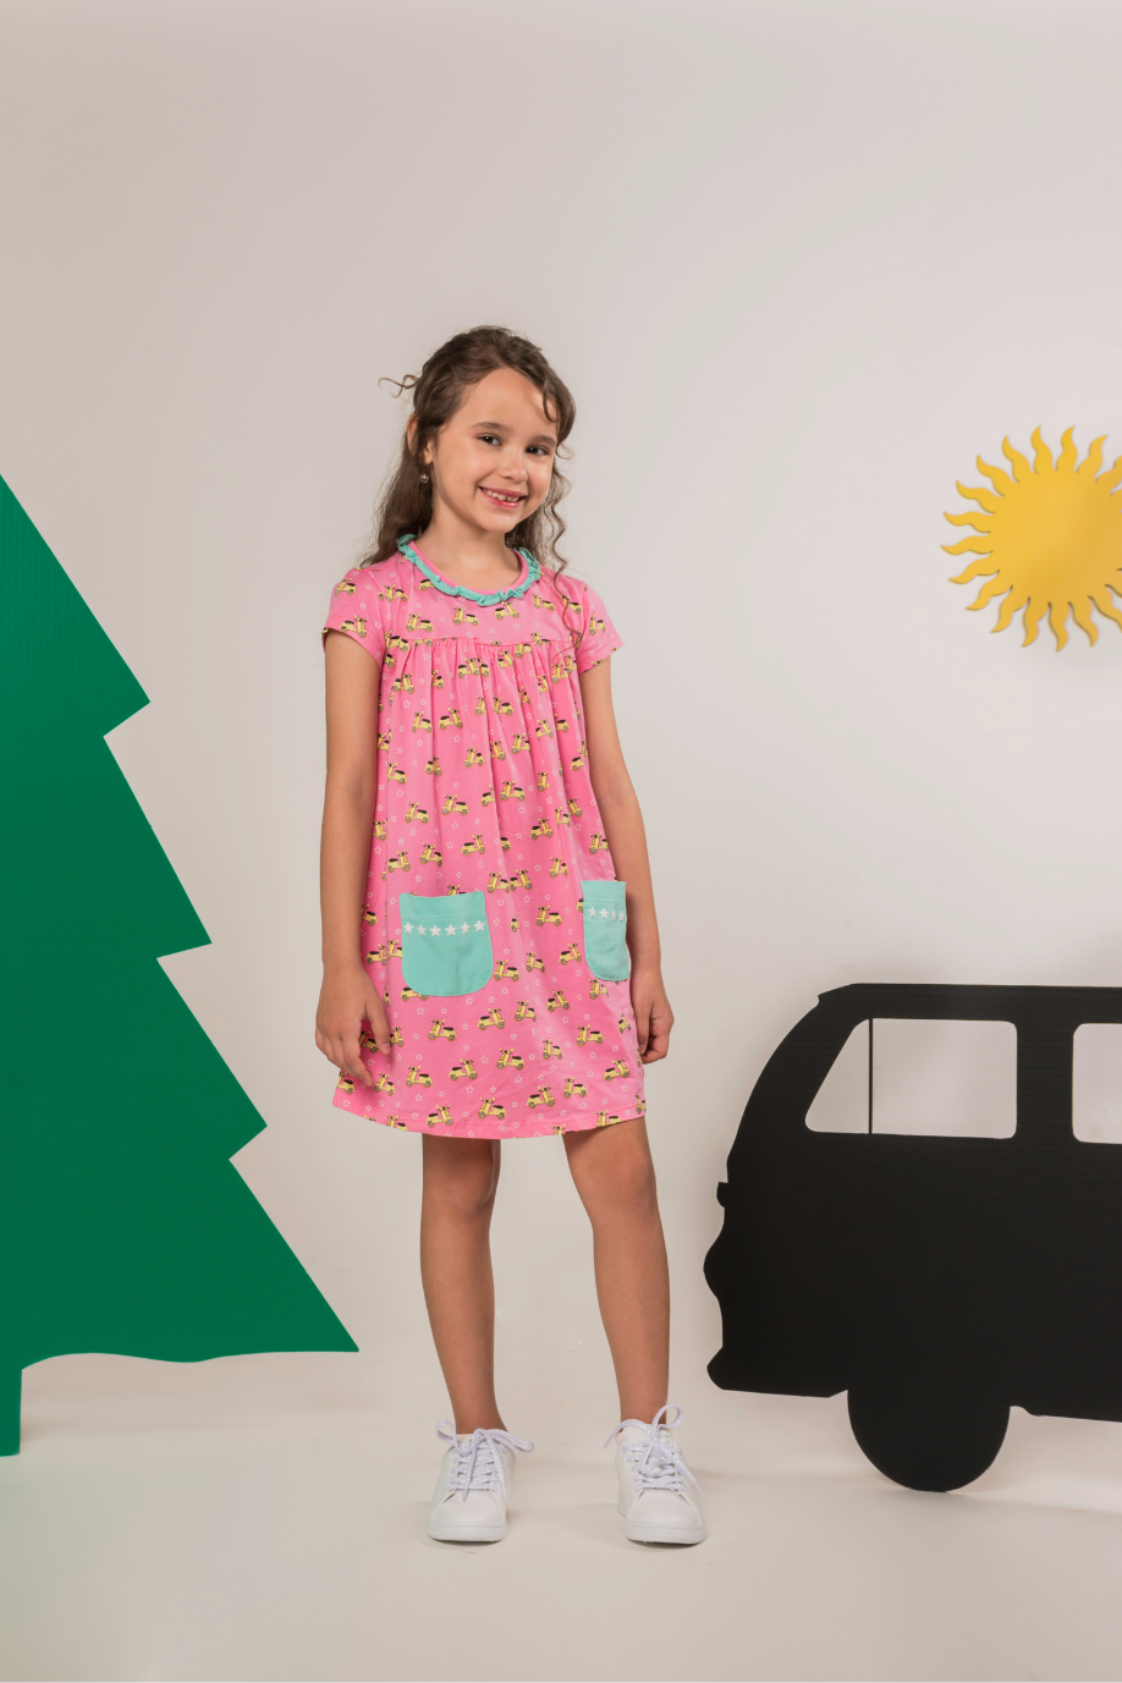 Girl dress in pink vespas and stars with pockets in front, Non-stereotypical styles, sustainable materials